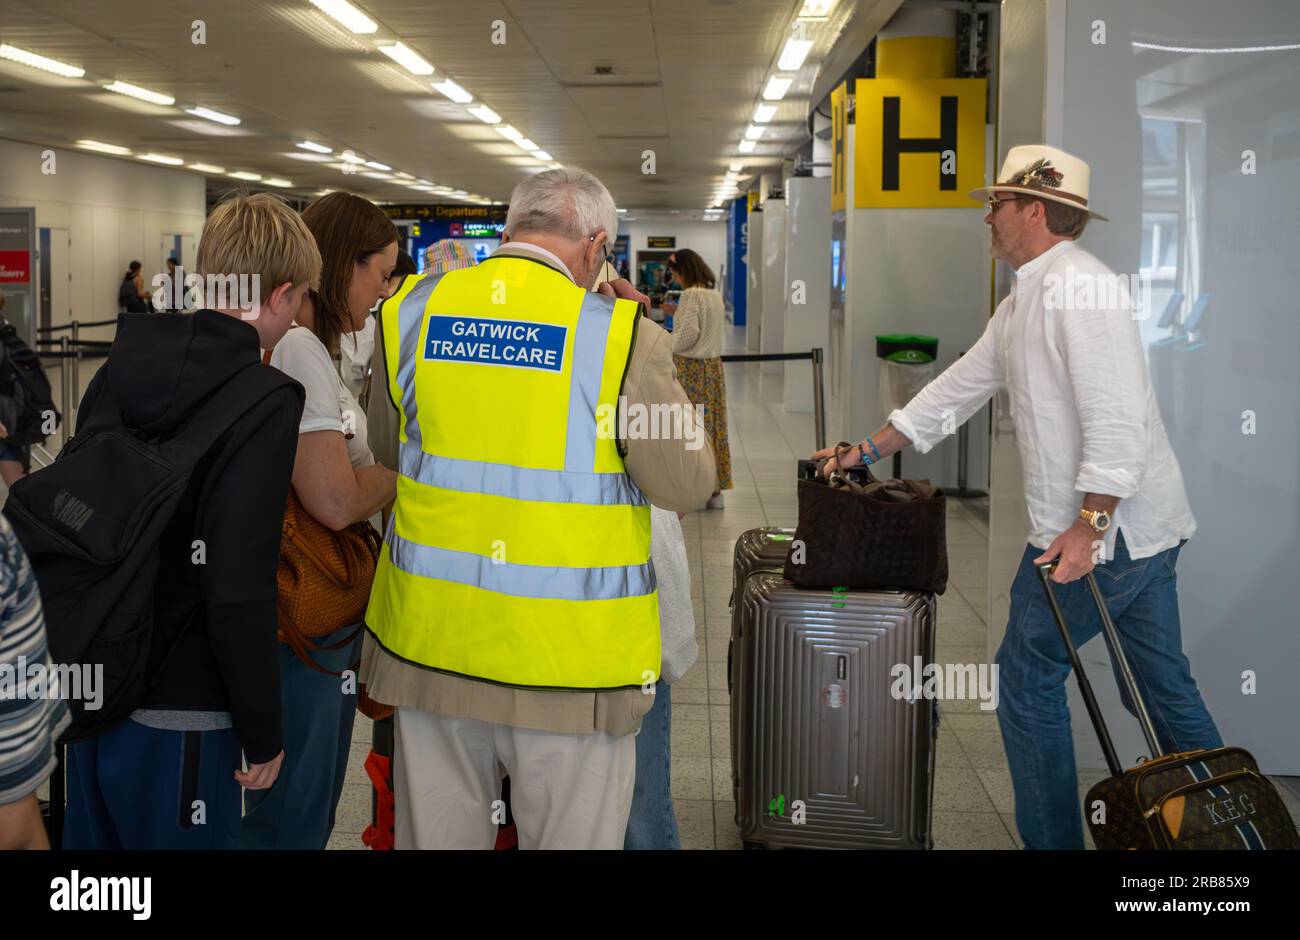 A volunteer with Gatwick Travelcare assists travellers at London Gatwick Airport South Terminal, West Sussex, UK. Gatwick Travelcare is staffed by vol Stock Photo